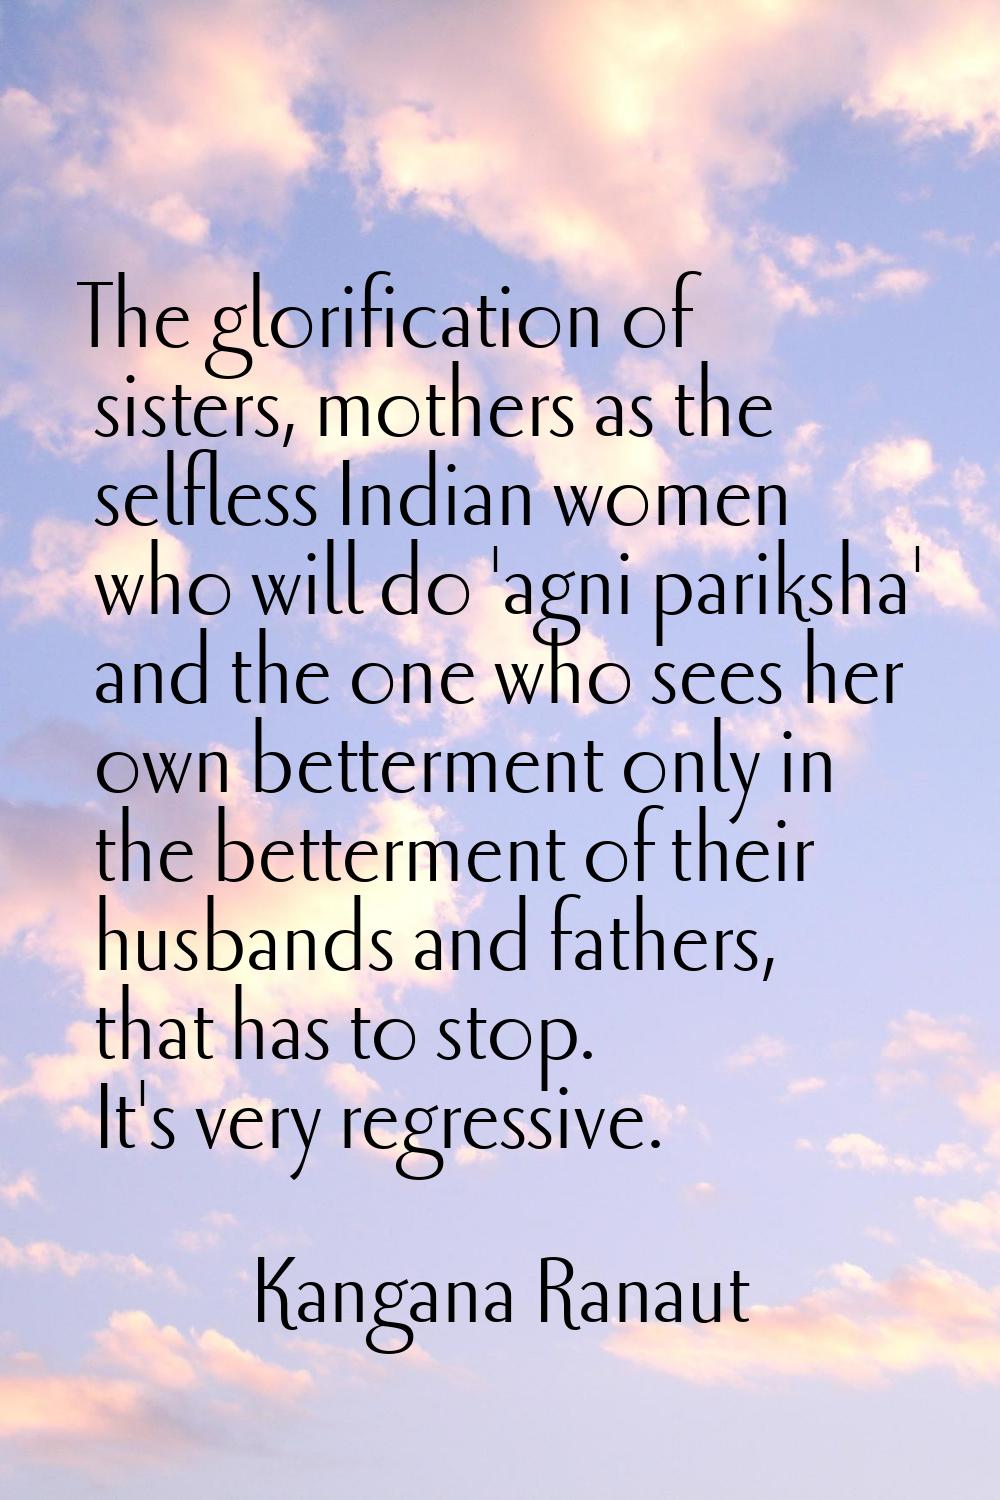 The glorification of sisters, mothers as the selfless Indian women who will do 'agni pariksha' and 